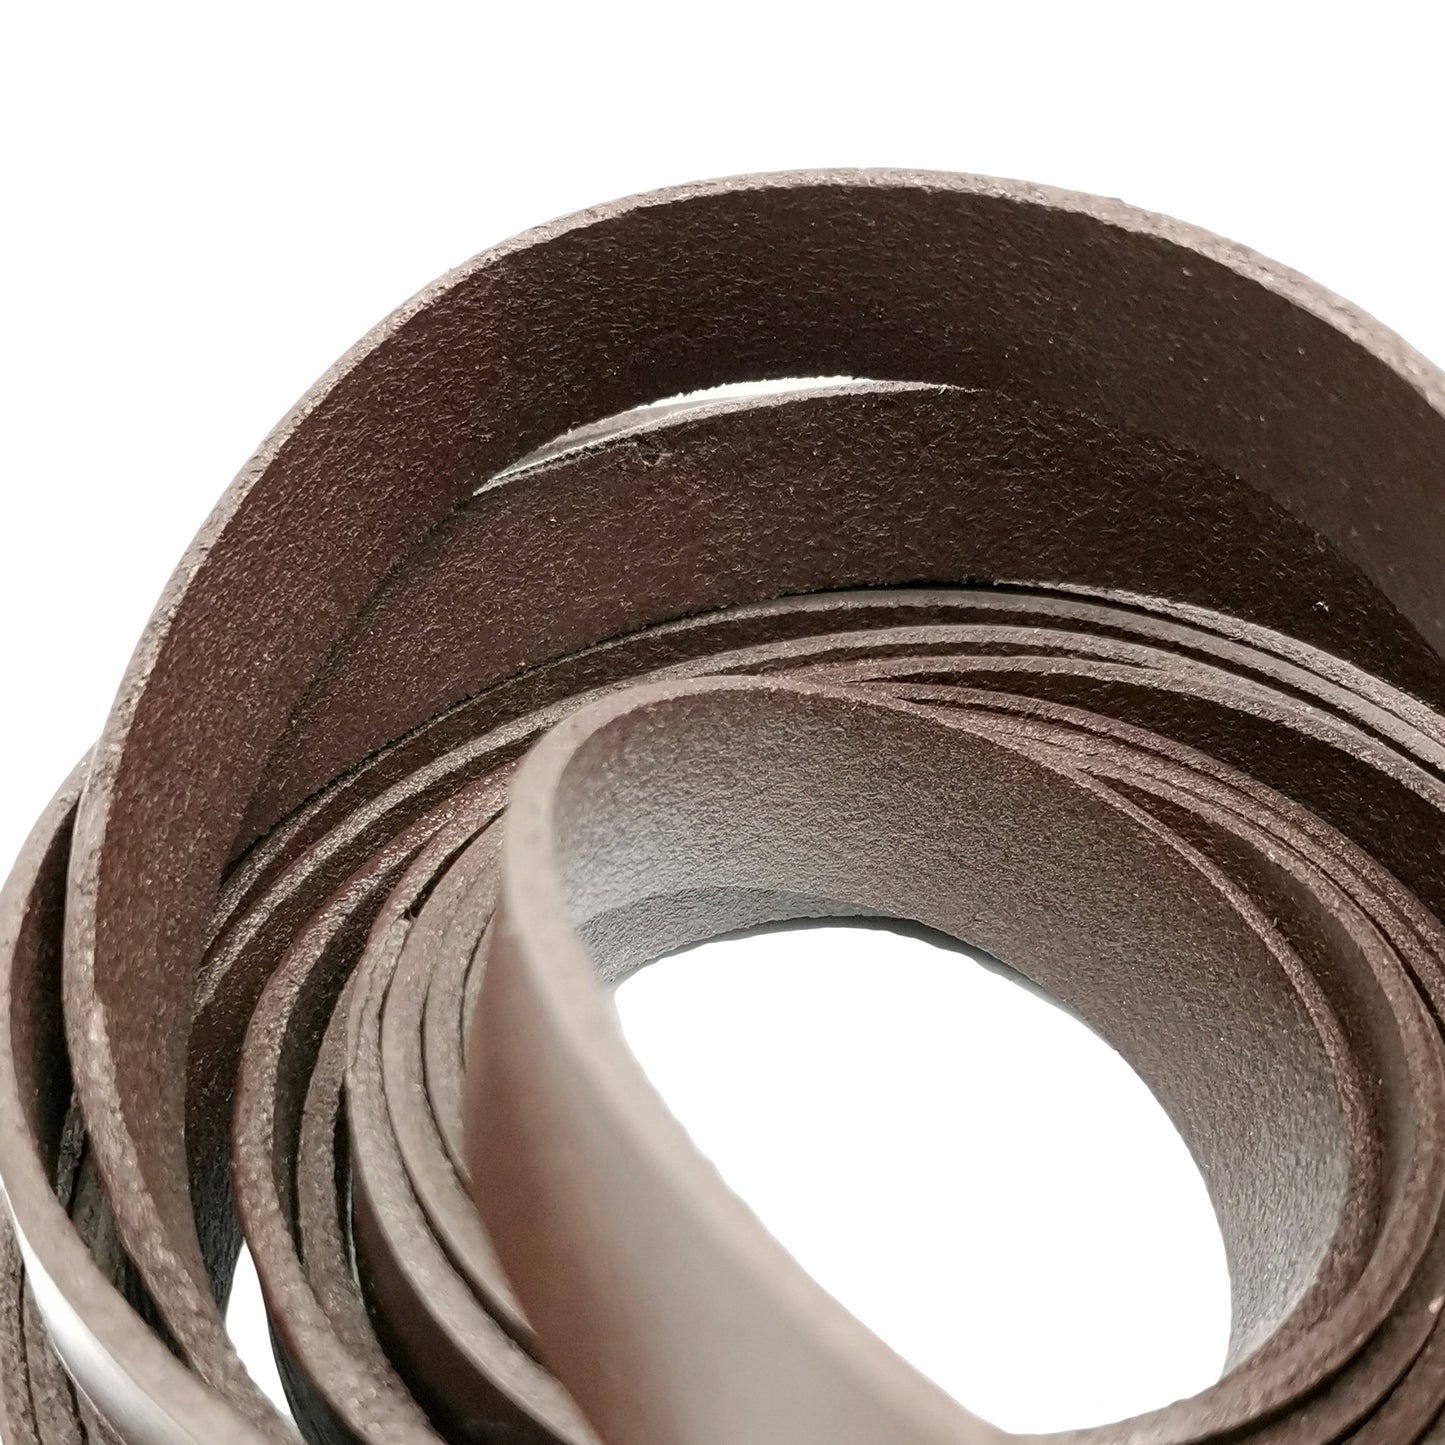 shapesbyX-15mm Flat Leather Strip 15x2mm Genuine Leather Band 2mm Thick Dark Brown